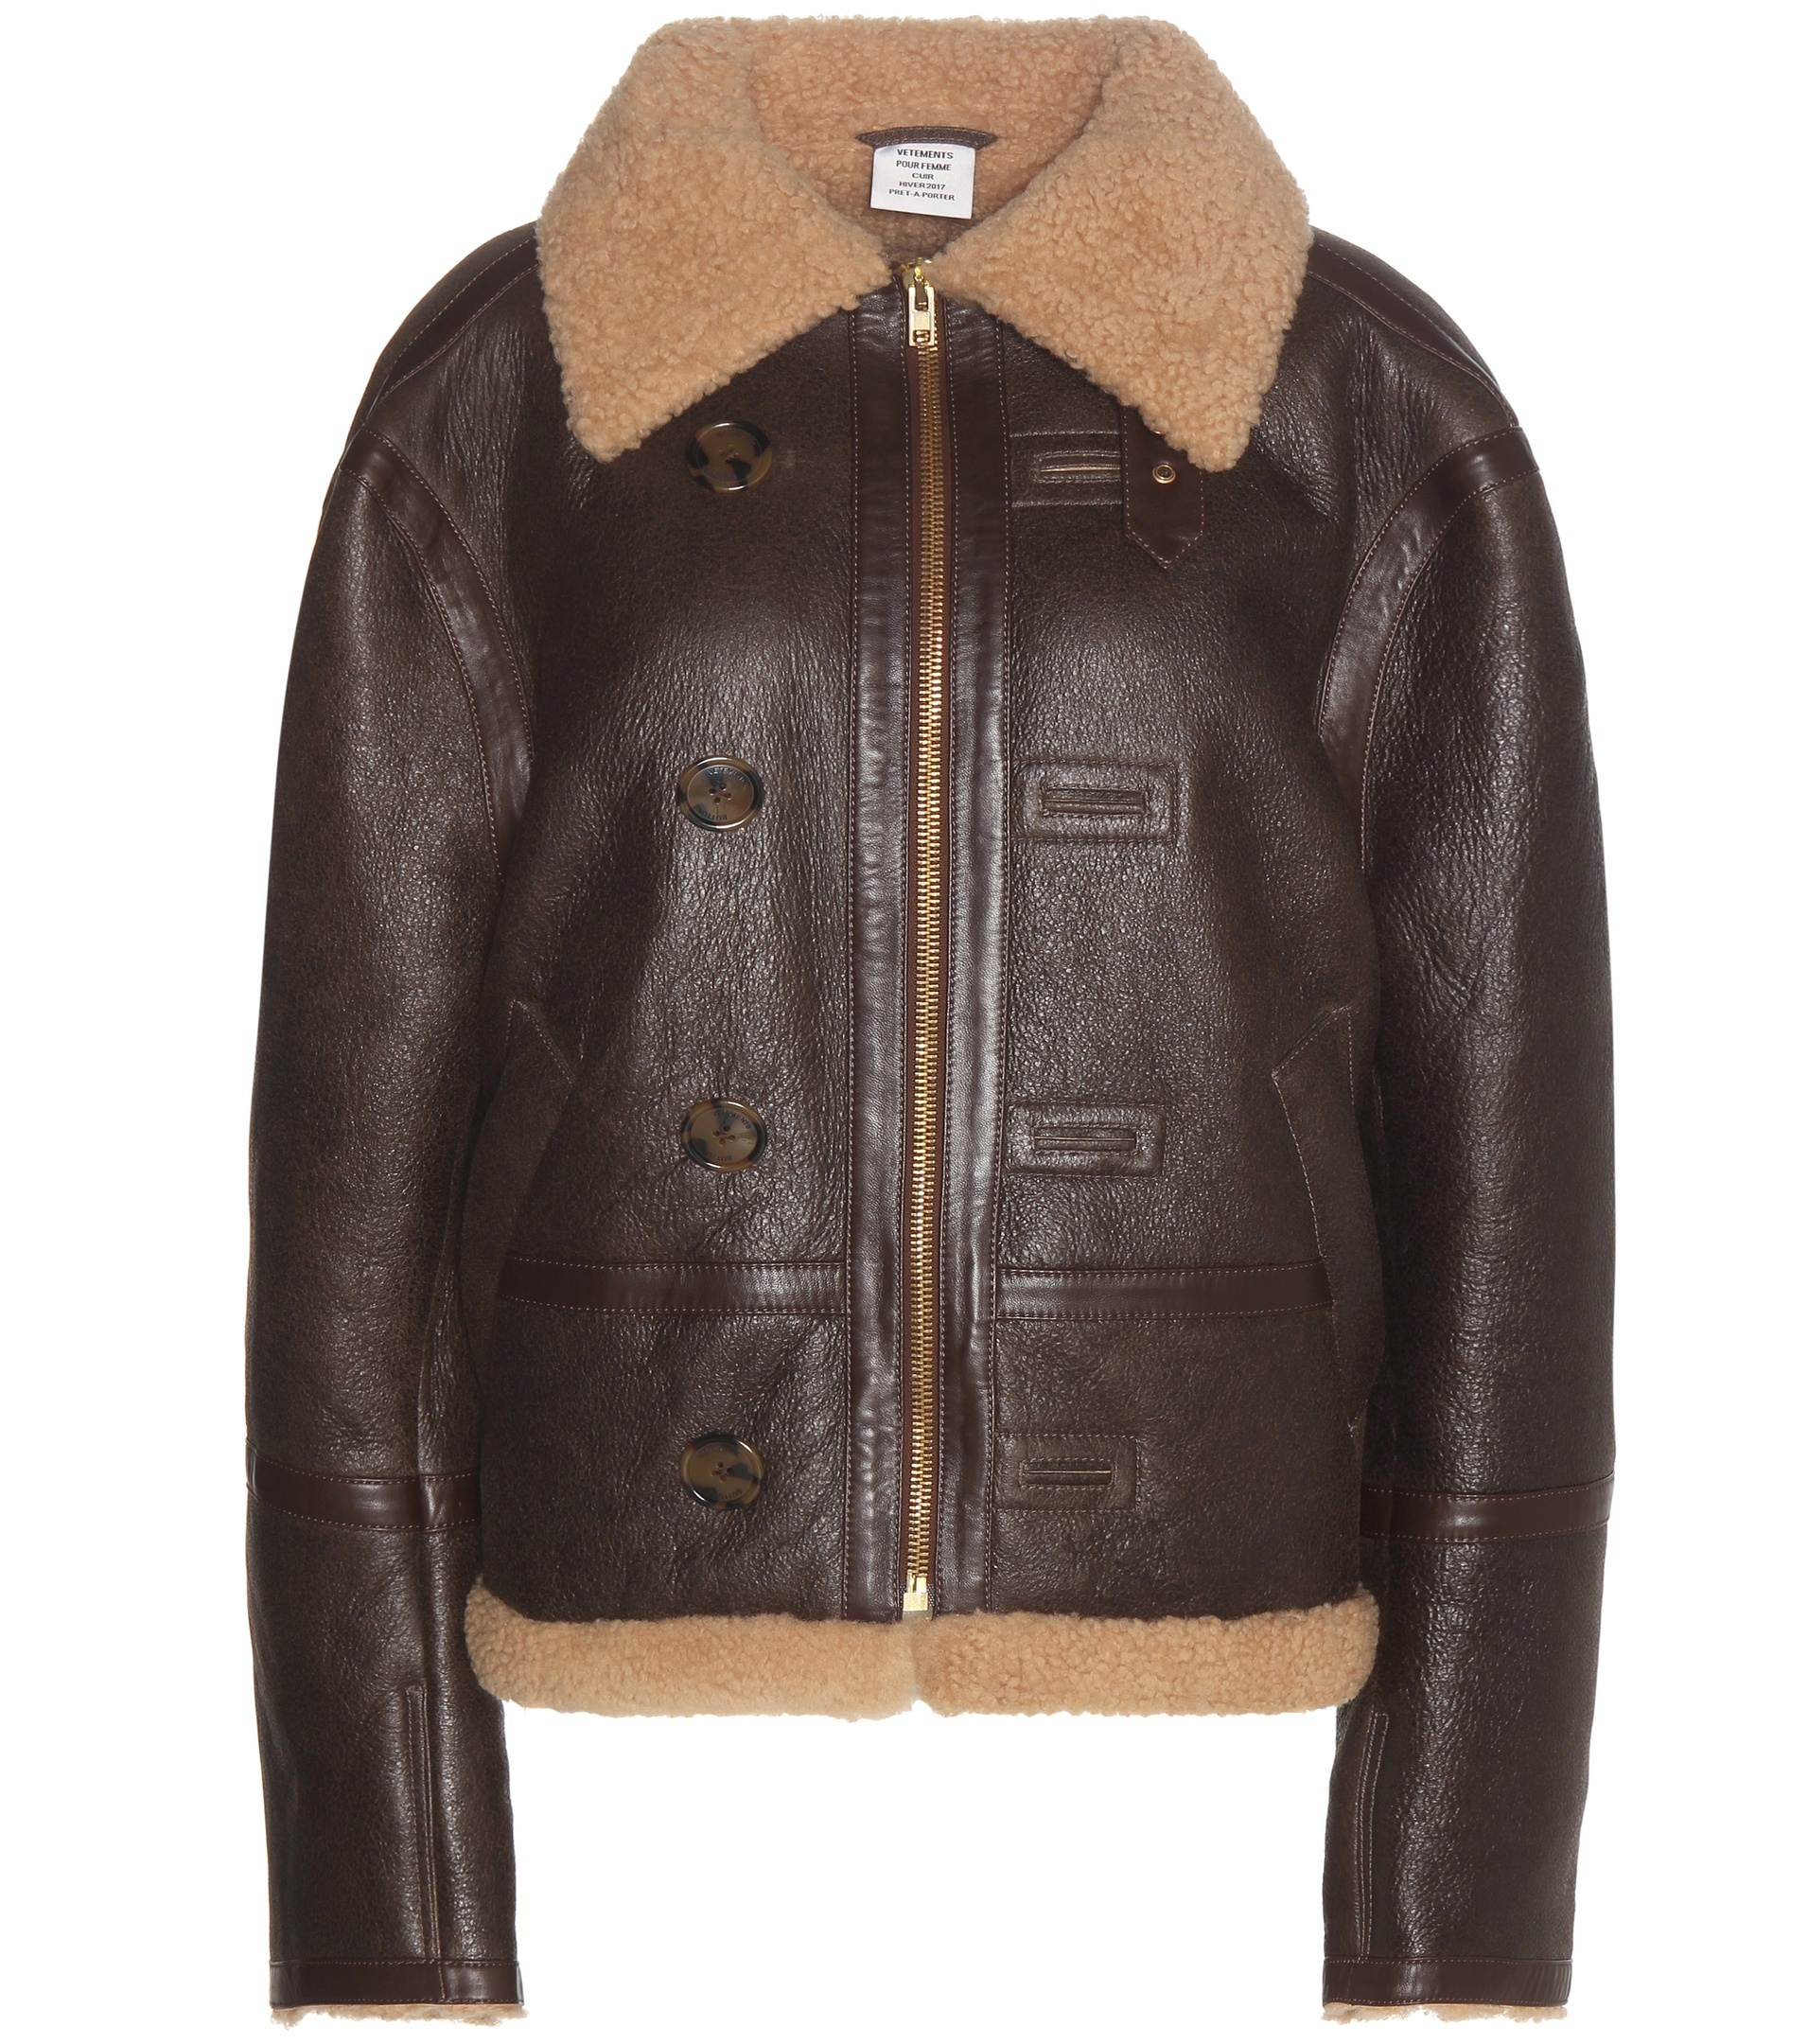 Vetements Shearling-lined Leather Jacket in Brown - Lyst